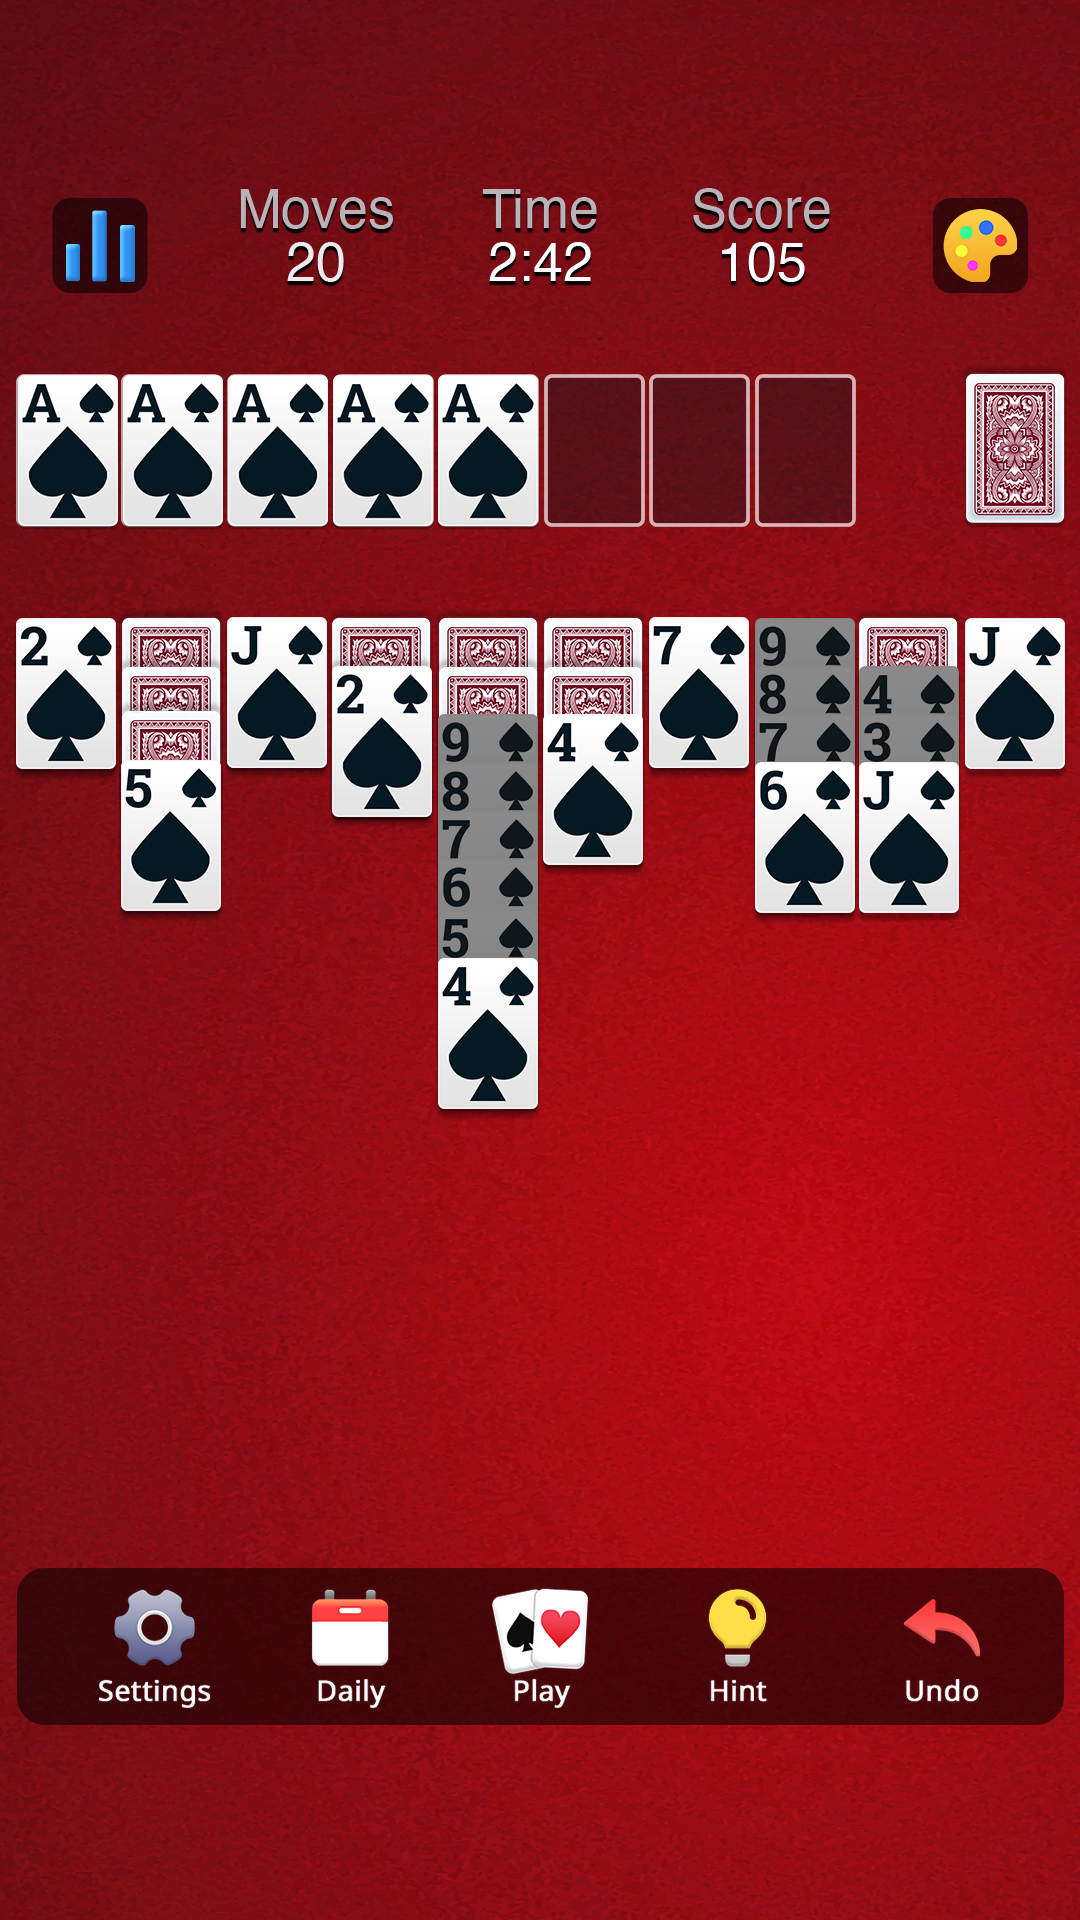 Spider Solitaire - Card Games - APK Download for Android